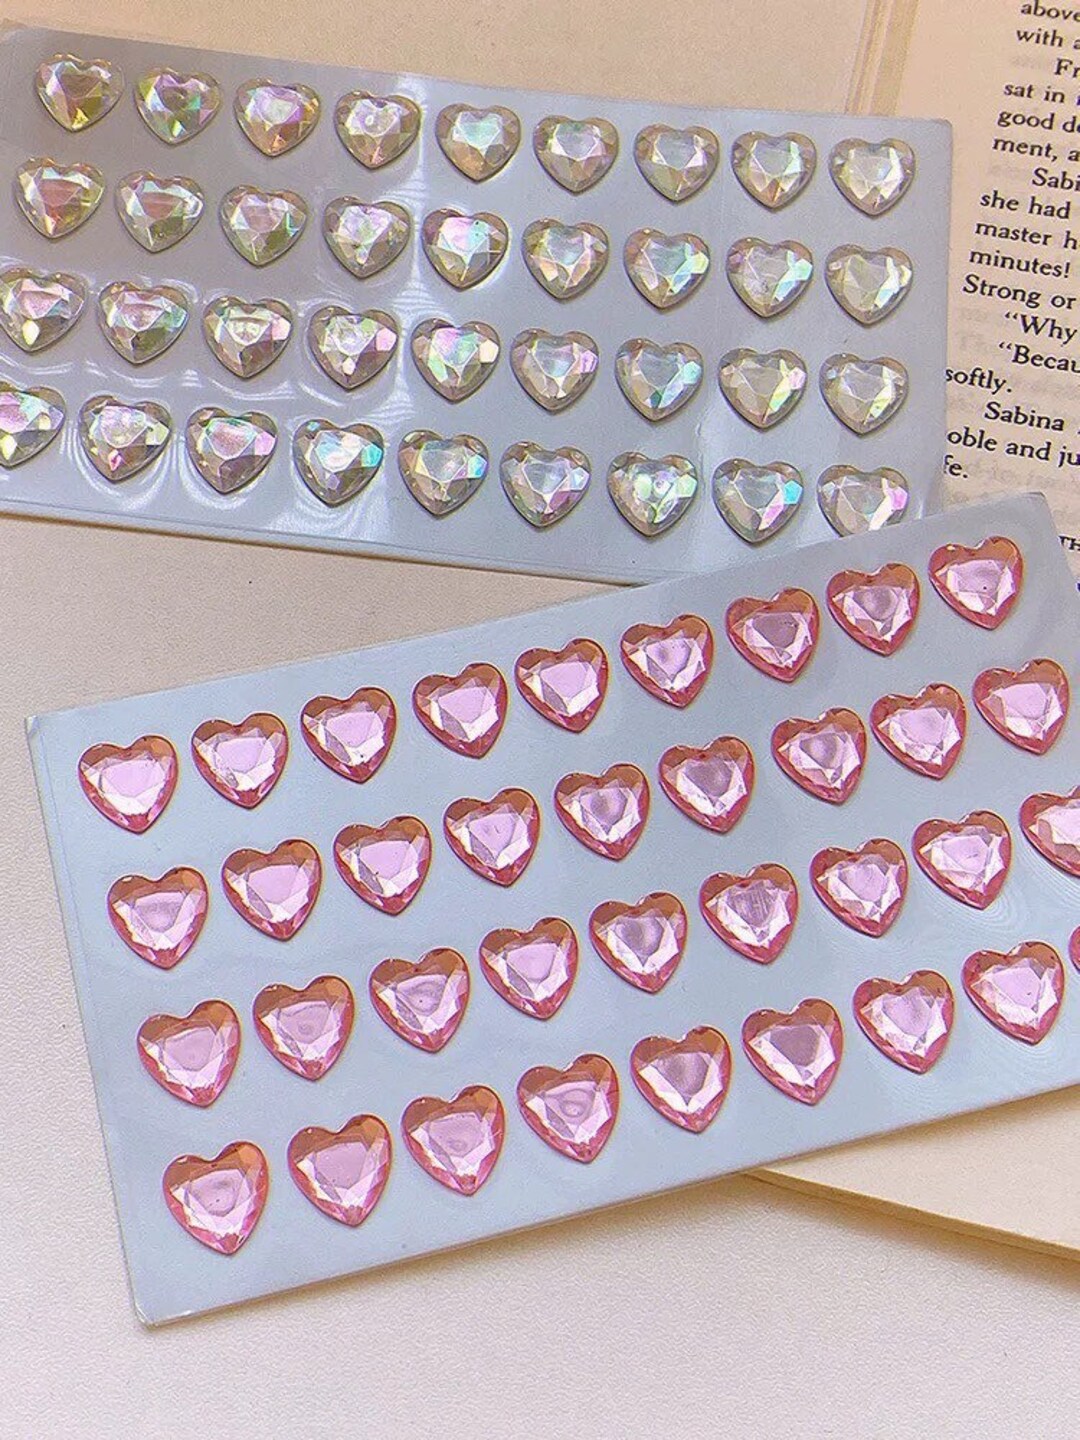 45pcs Glitter Heart Shape Self Adhesive Sticker for Kids Craft (Mixed  Color) 